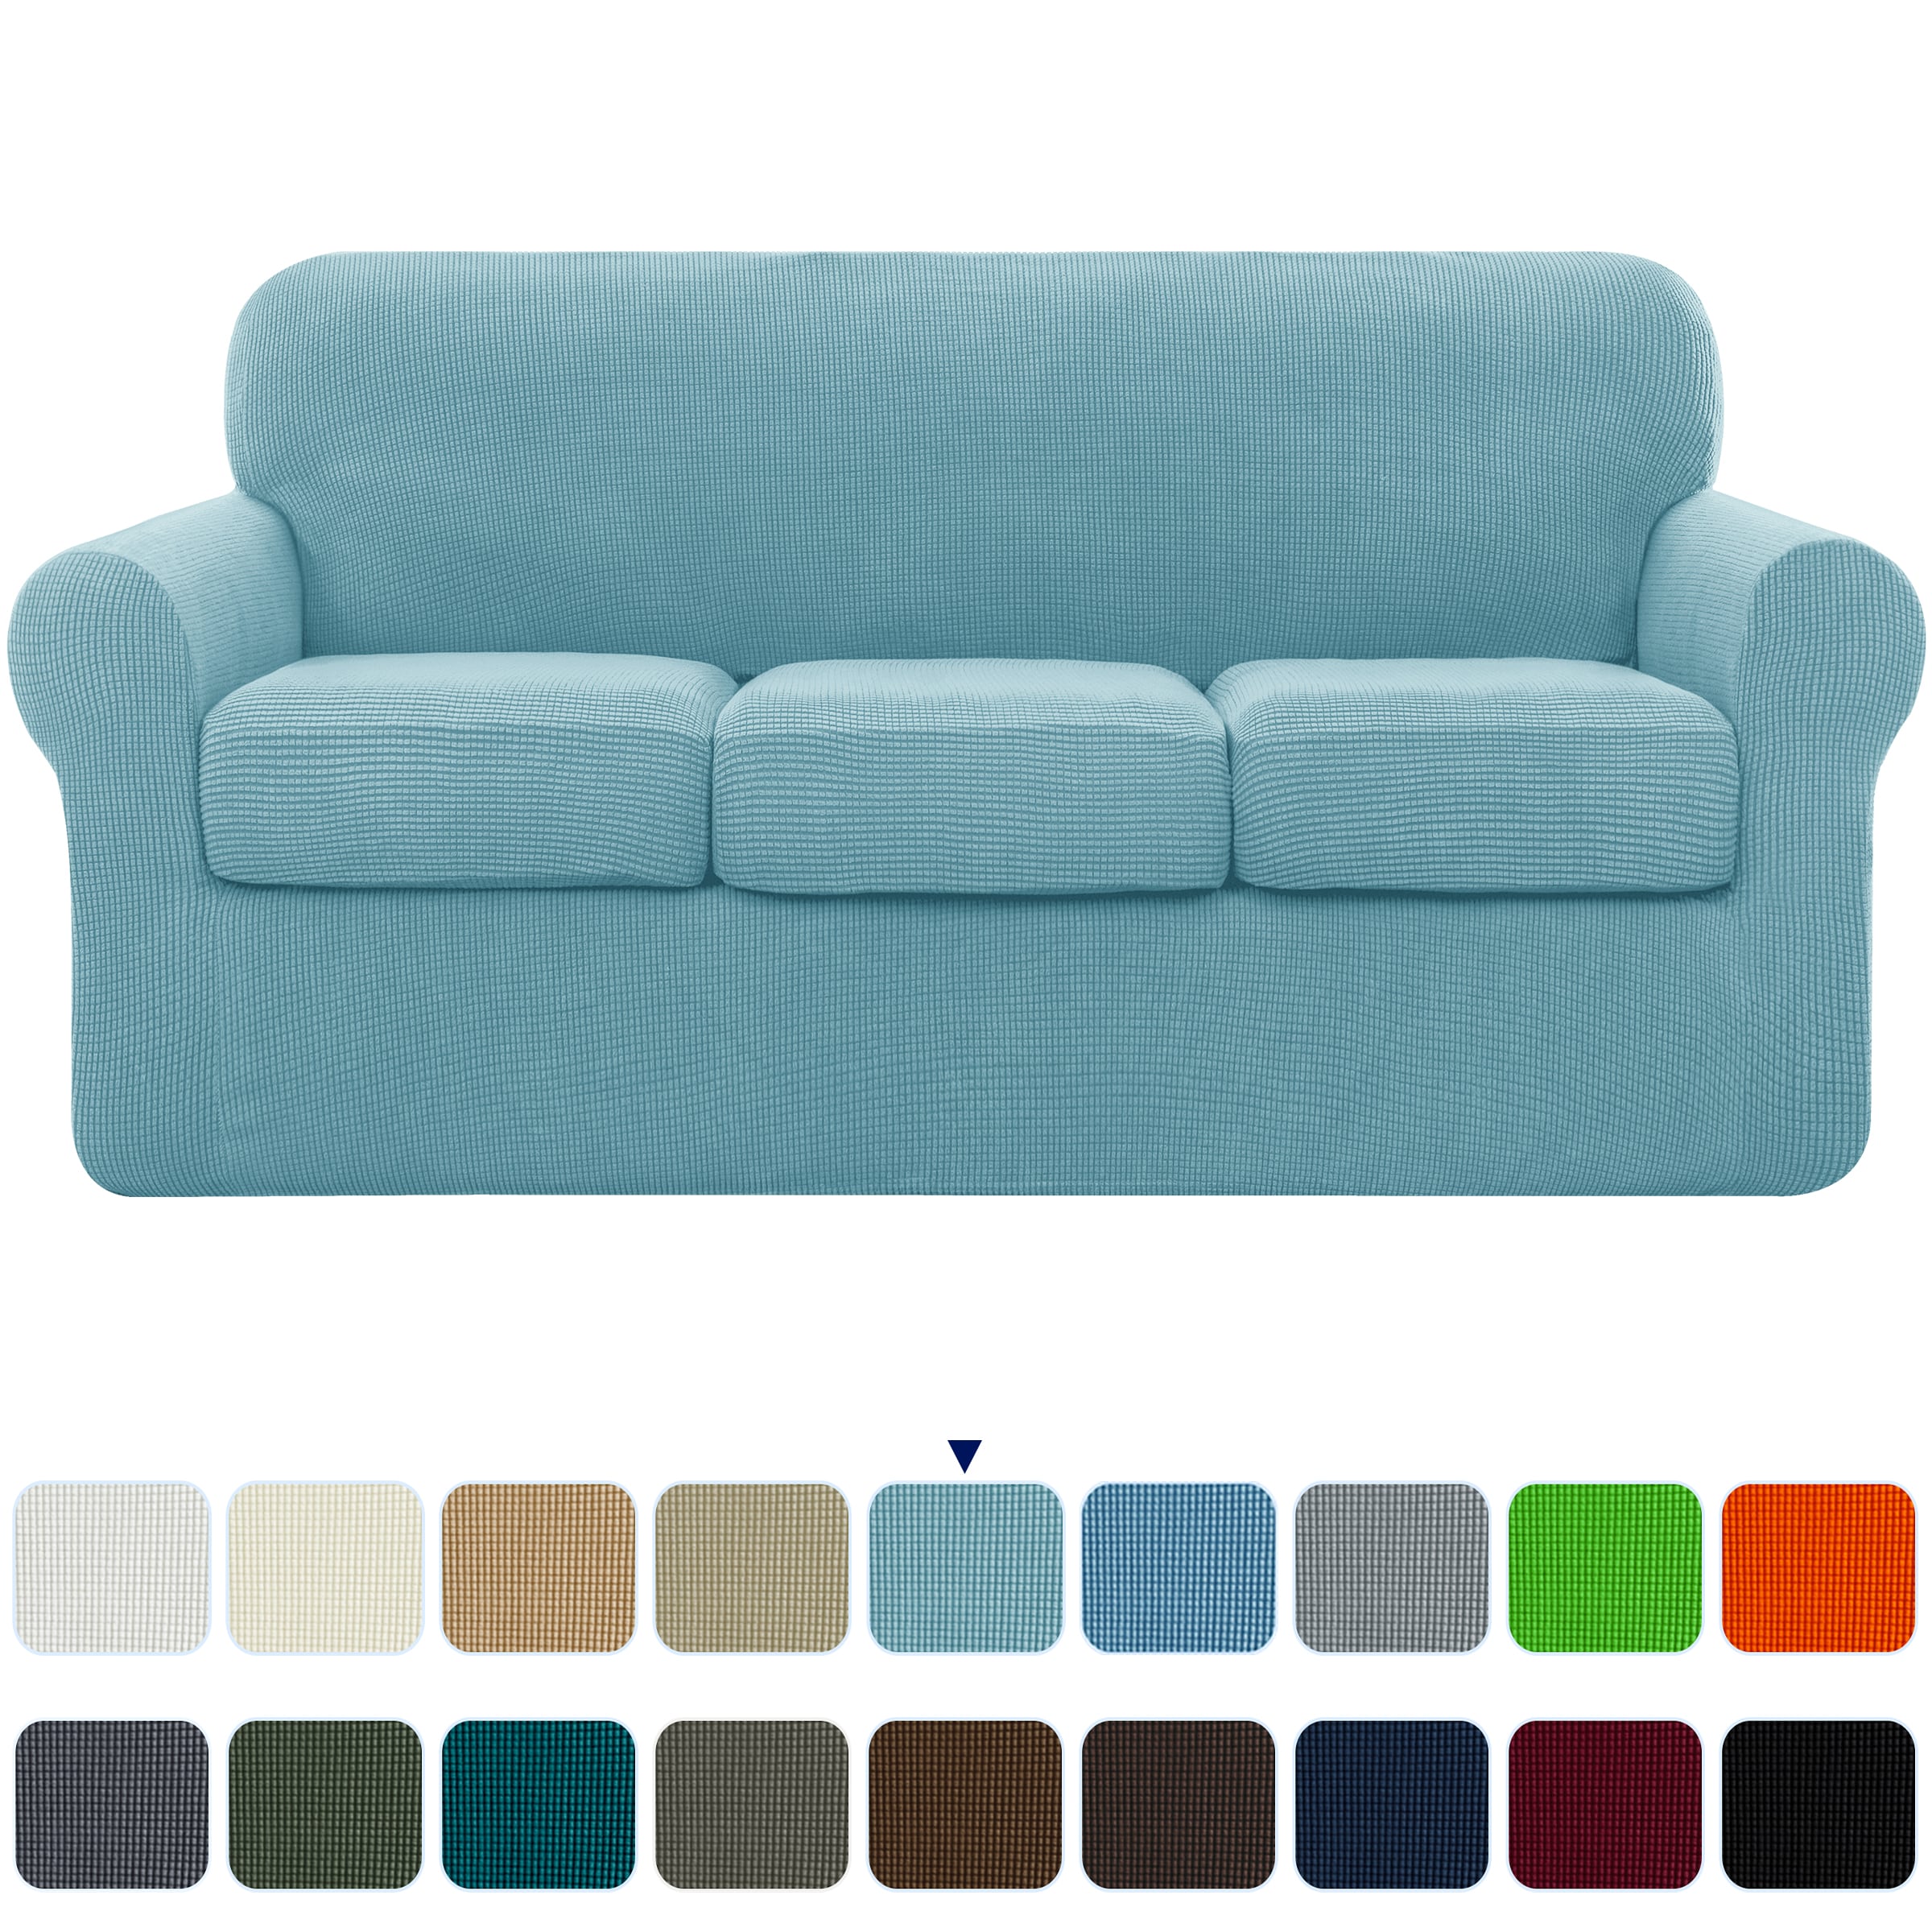 subrtex Jacquard Stretch Sofa Cover Polyester Fabric Slipcovers for Couch Recliner Armchair 3 Seaters, Teal